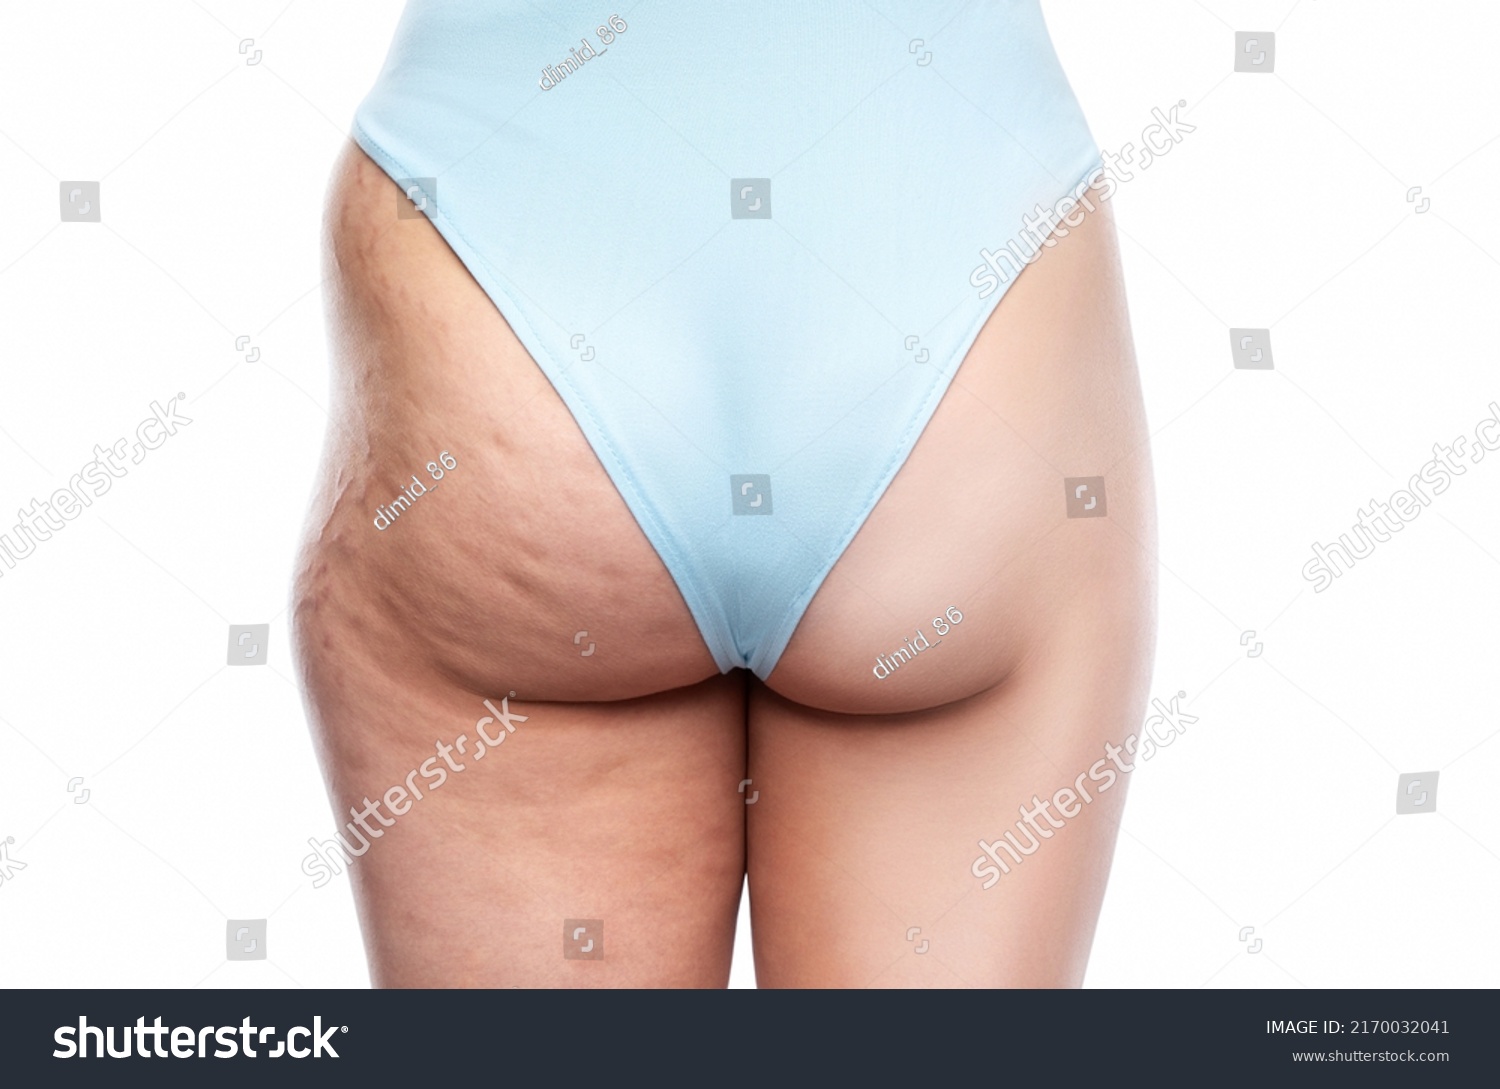 Buttocks and legs of a fat woman with cellulite and stretch marks before and after losing weight. Overweight treatment. #2170032041